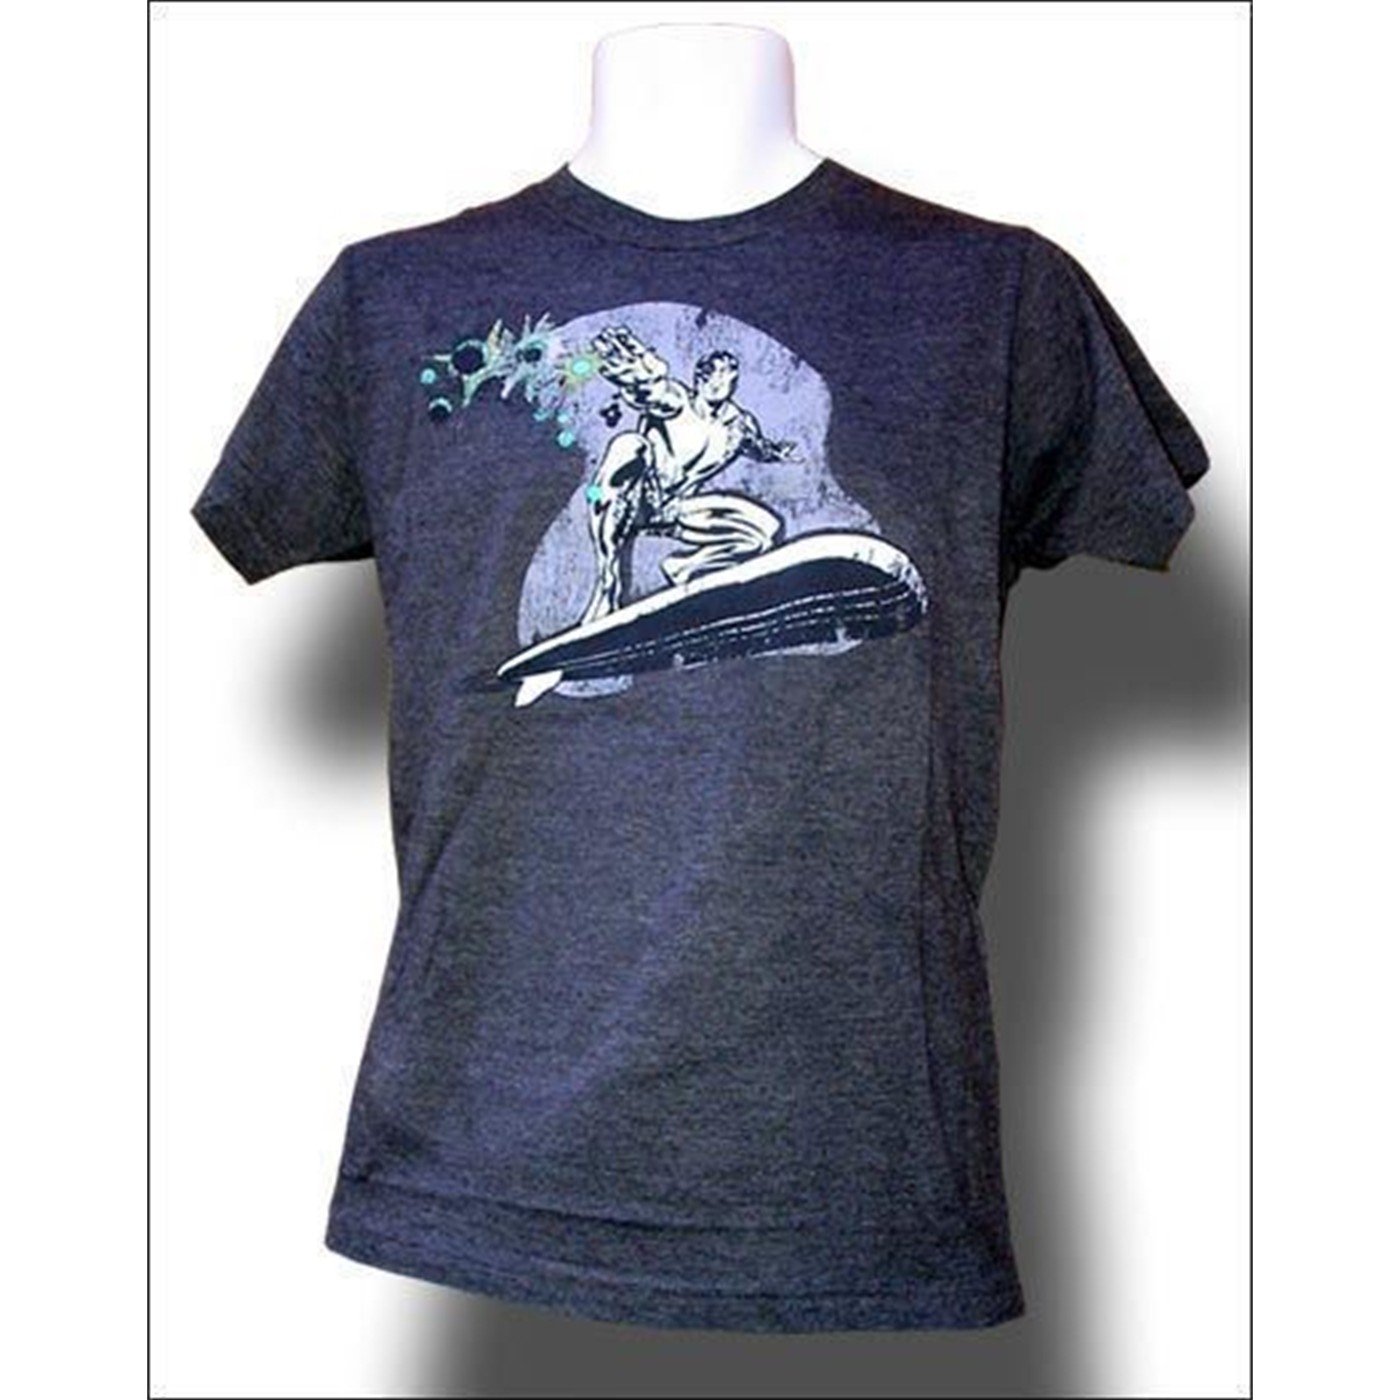 Silver Surfer Heather Gray T-Shirt